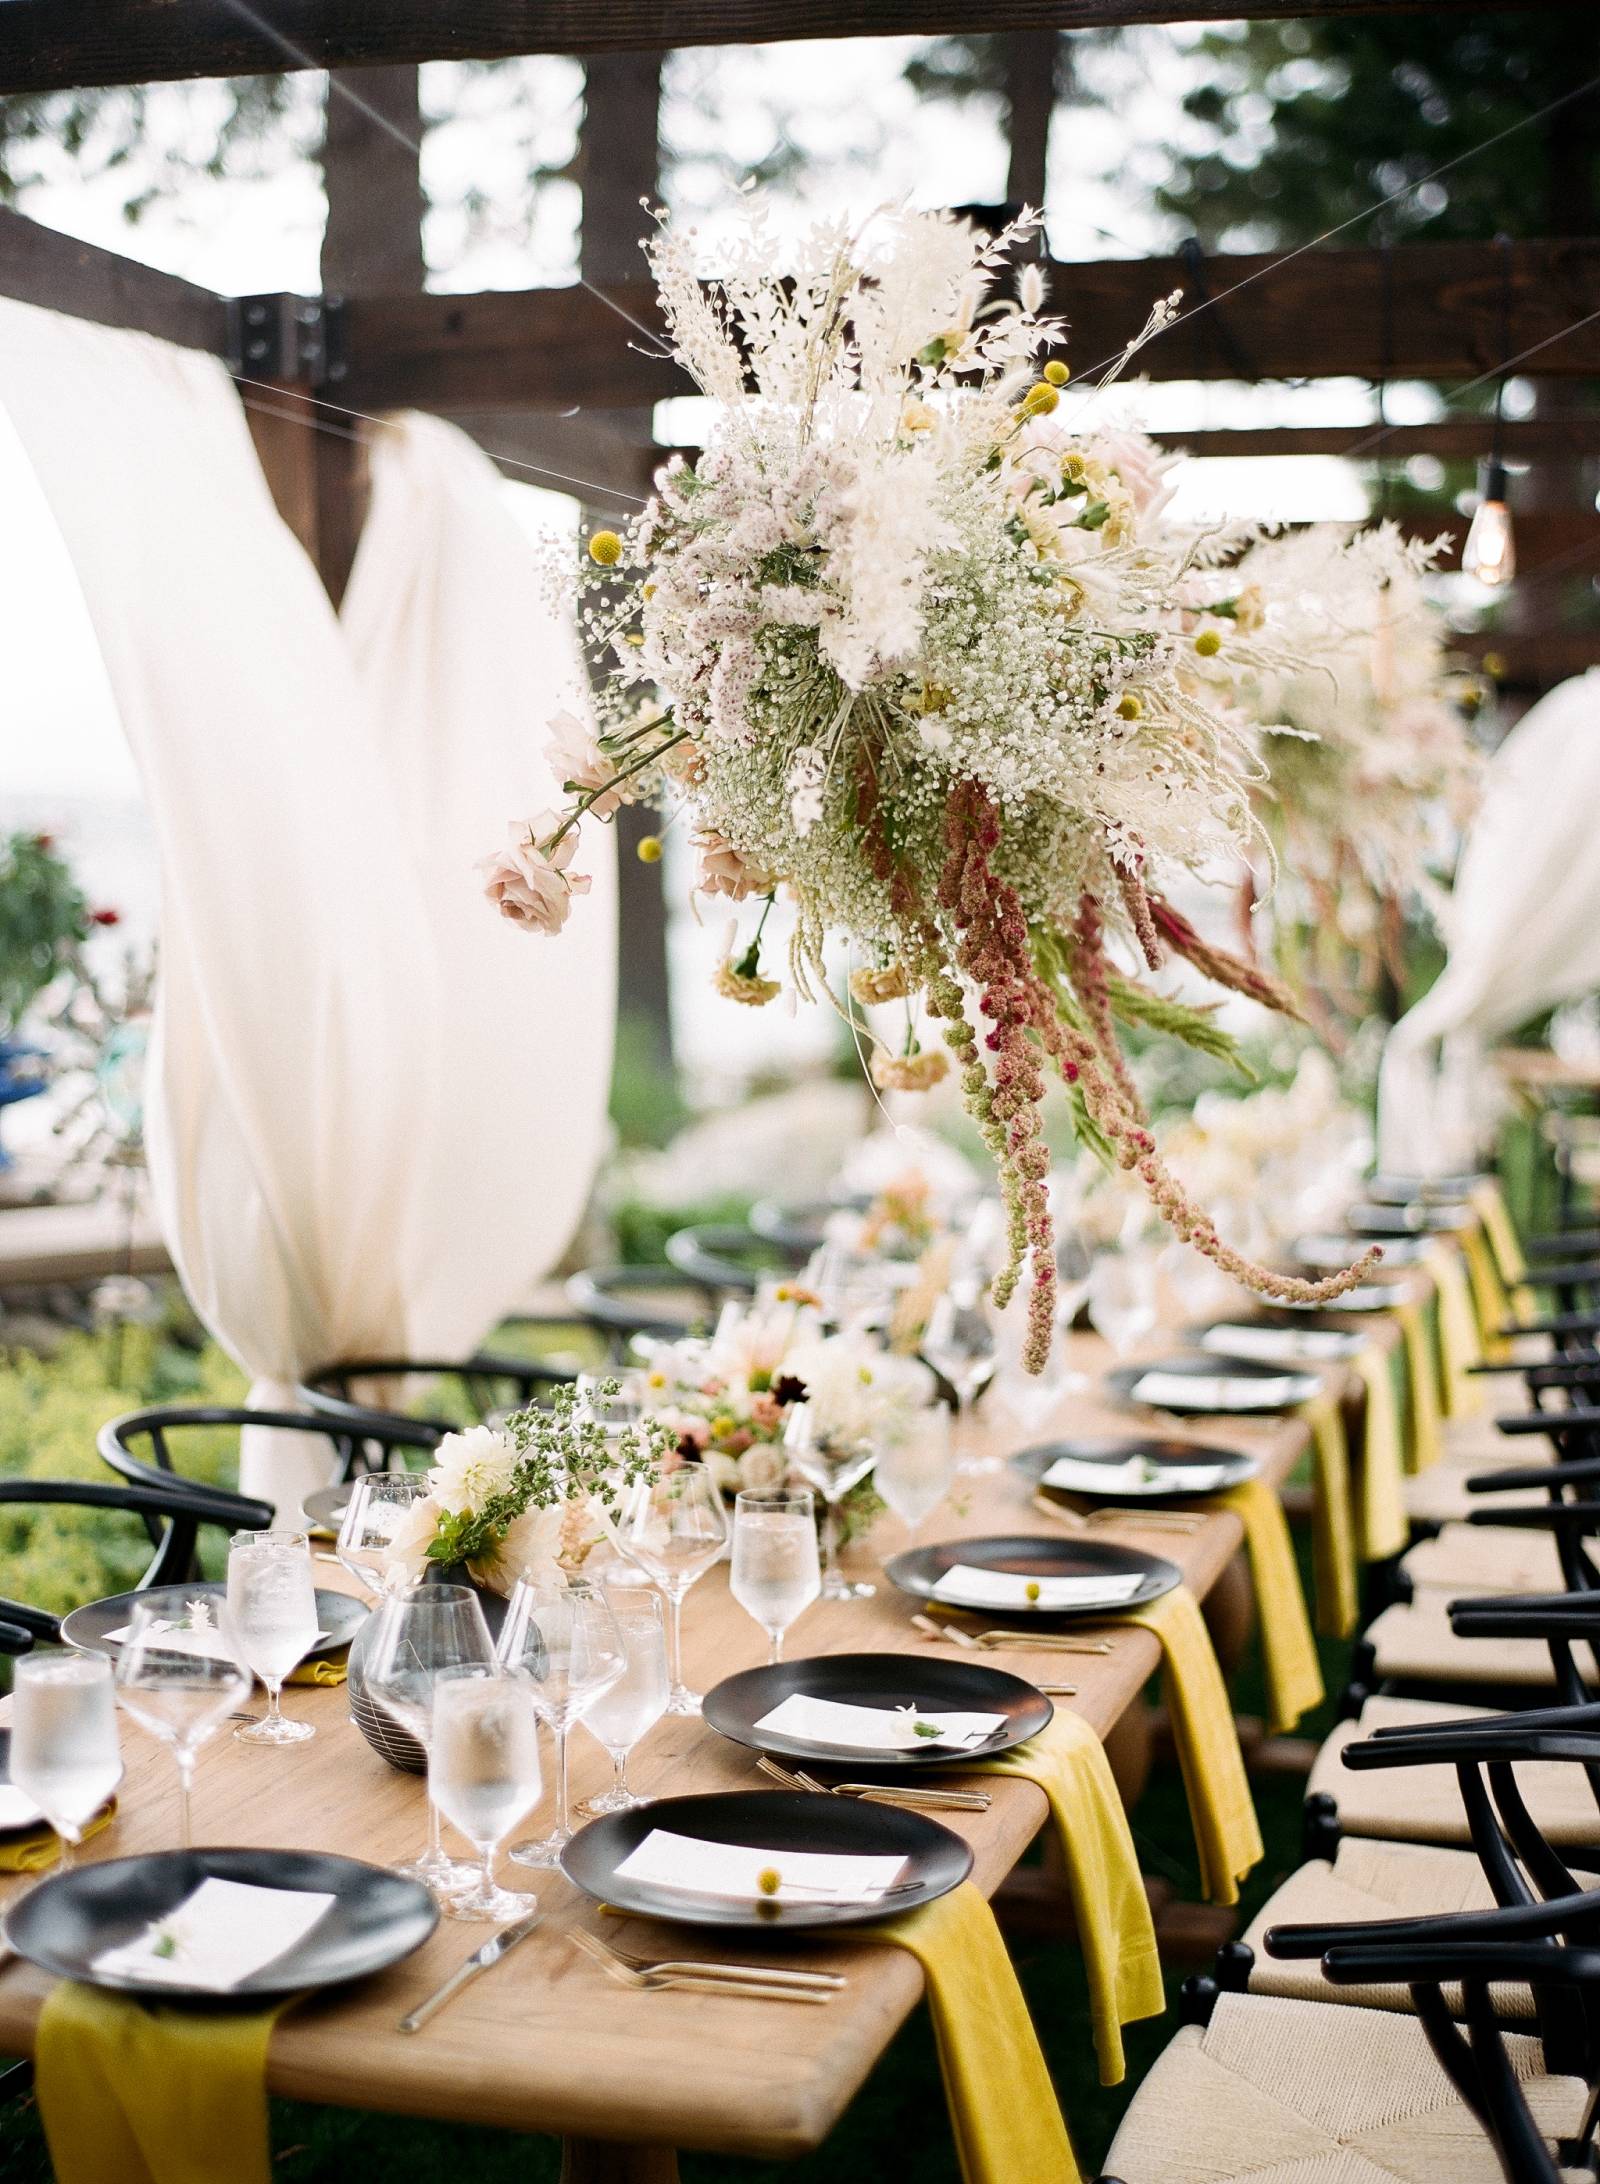 Best Of 2019 Wedding Reception Tablescapes